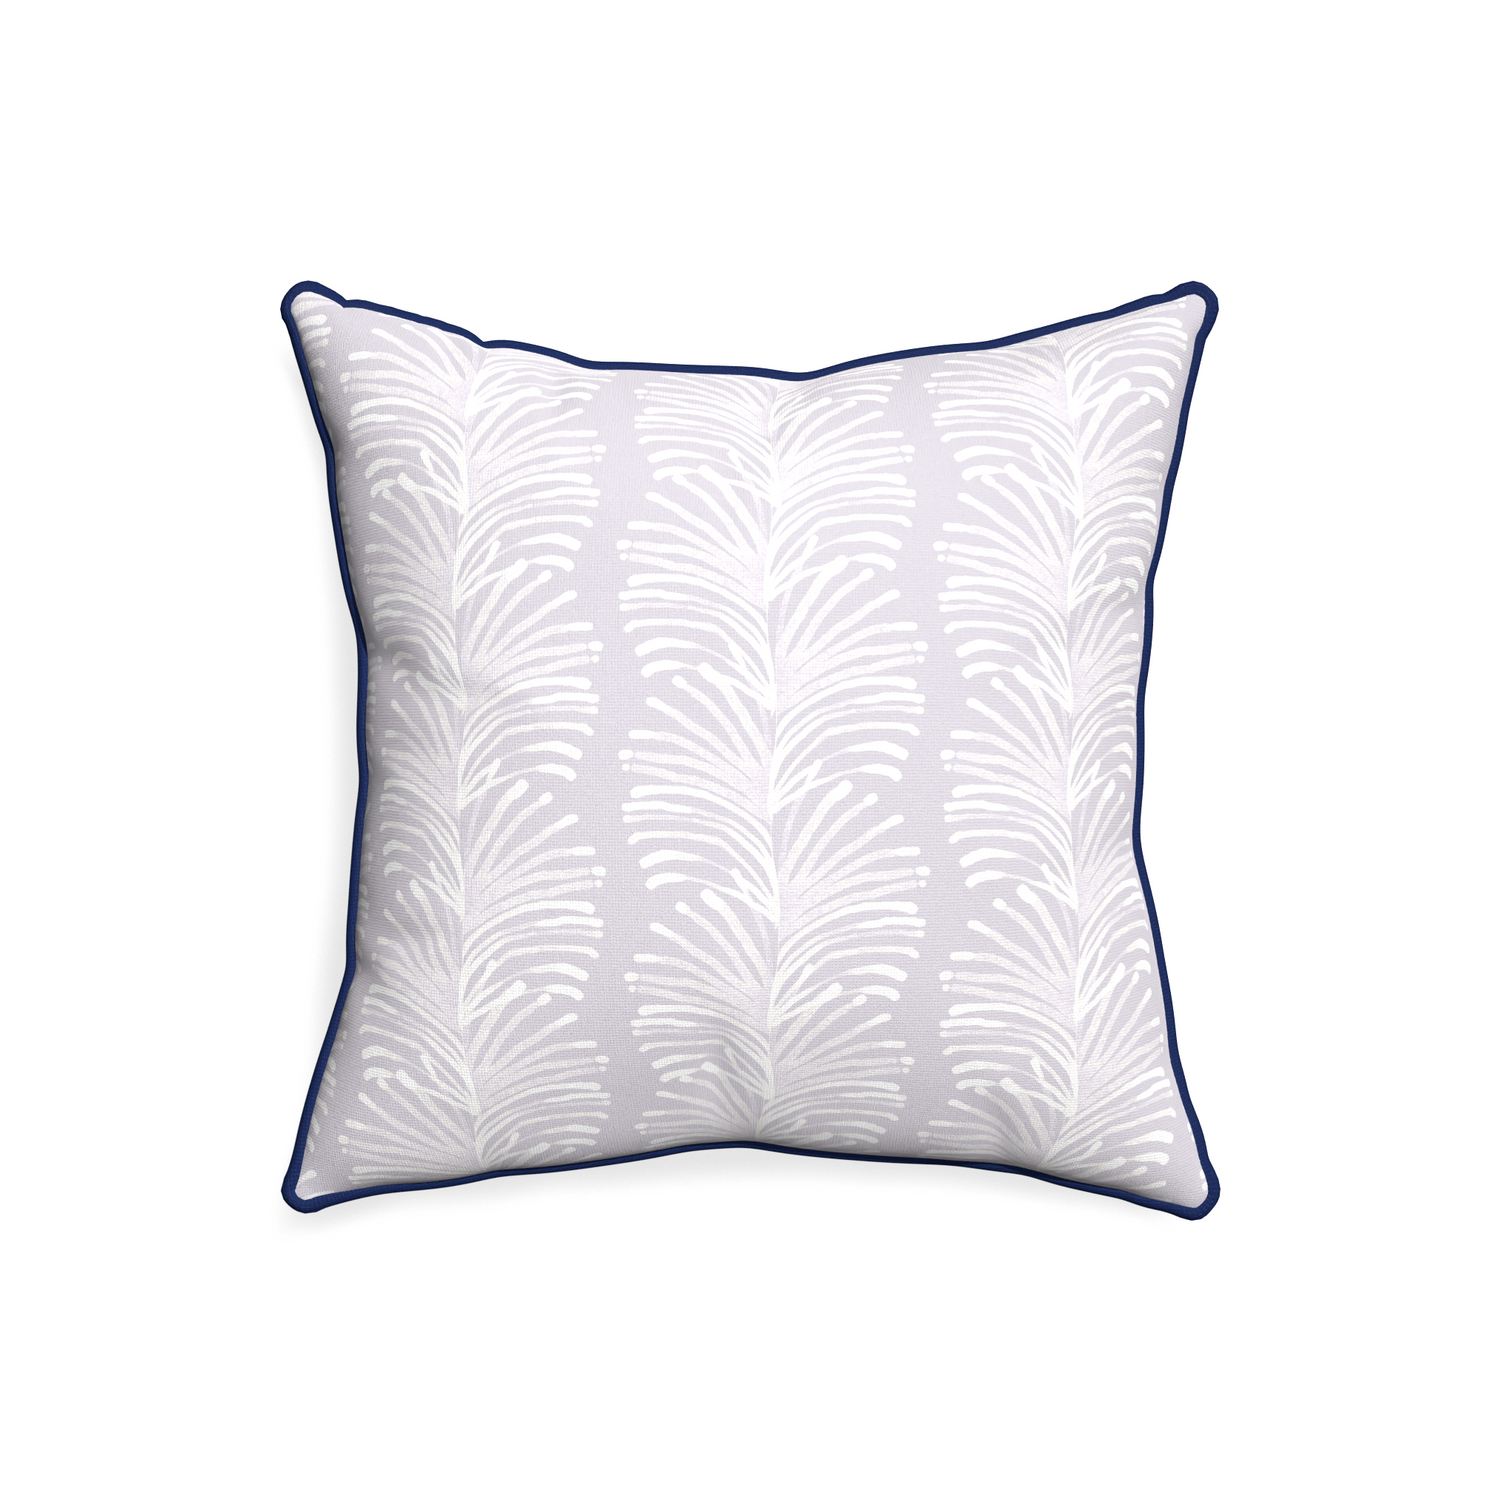 20-square emma lavender custom pillow with midnight piping on white background